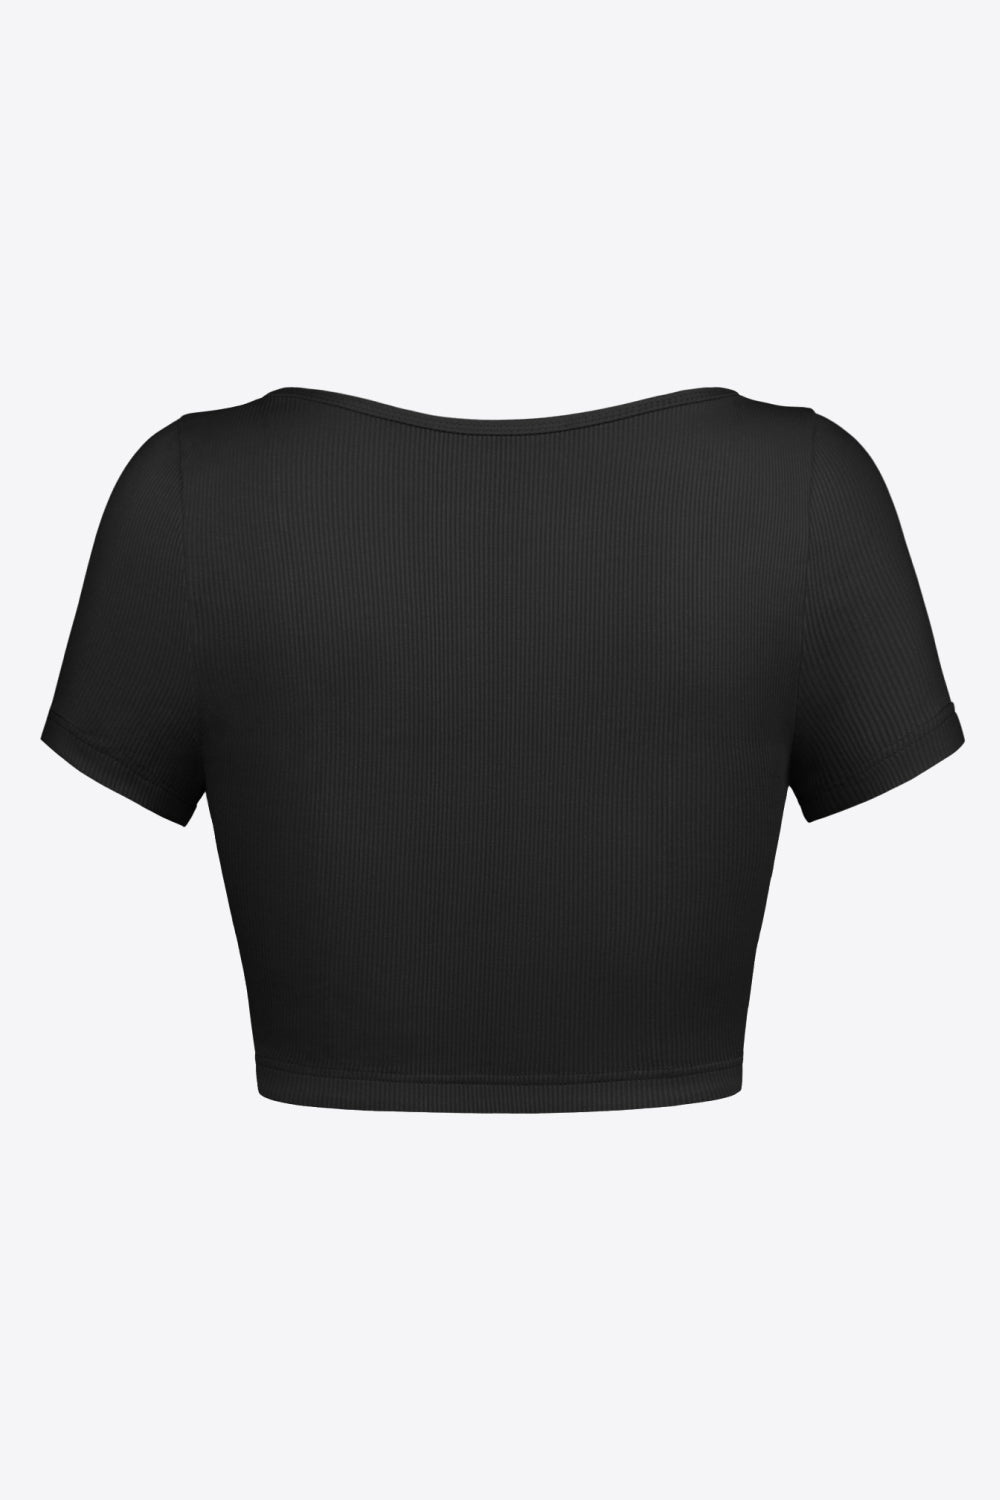 Square Neck Ribbed Crop Top Print on any thing USA/STOD clothes